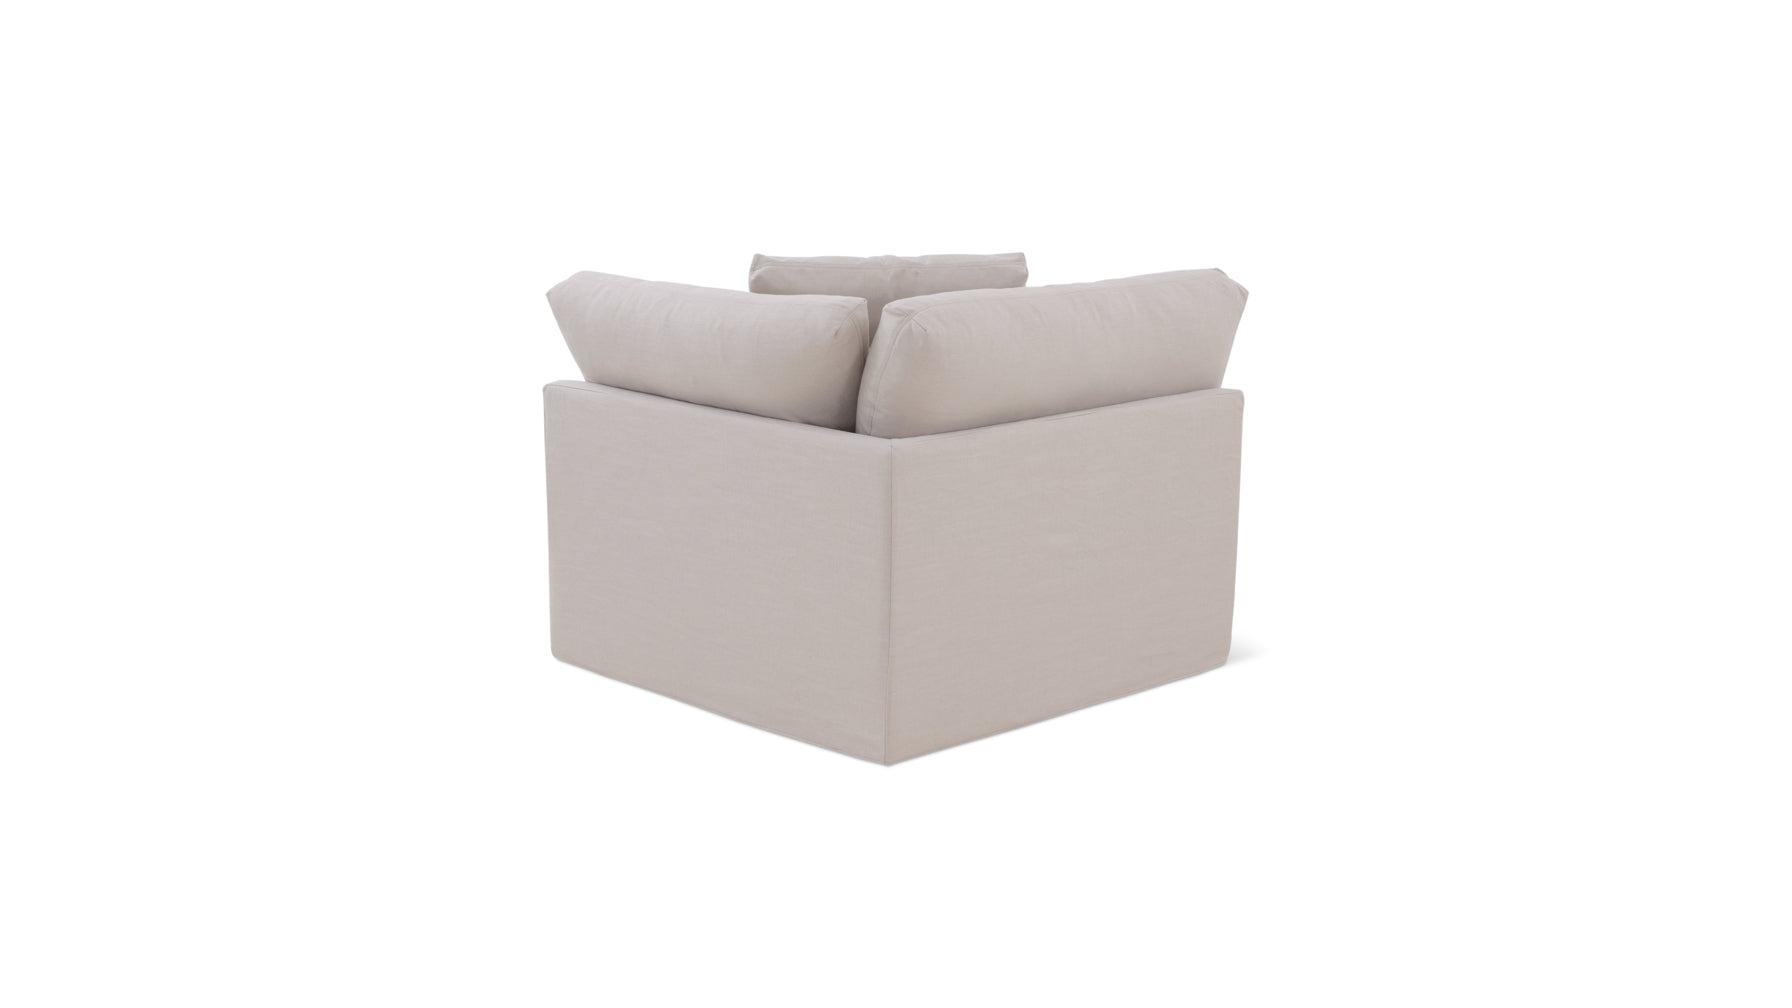 Get Together™ Corner Chair, Large, Clay - Image 10